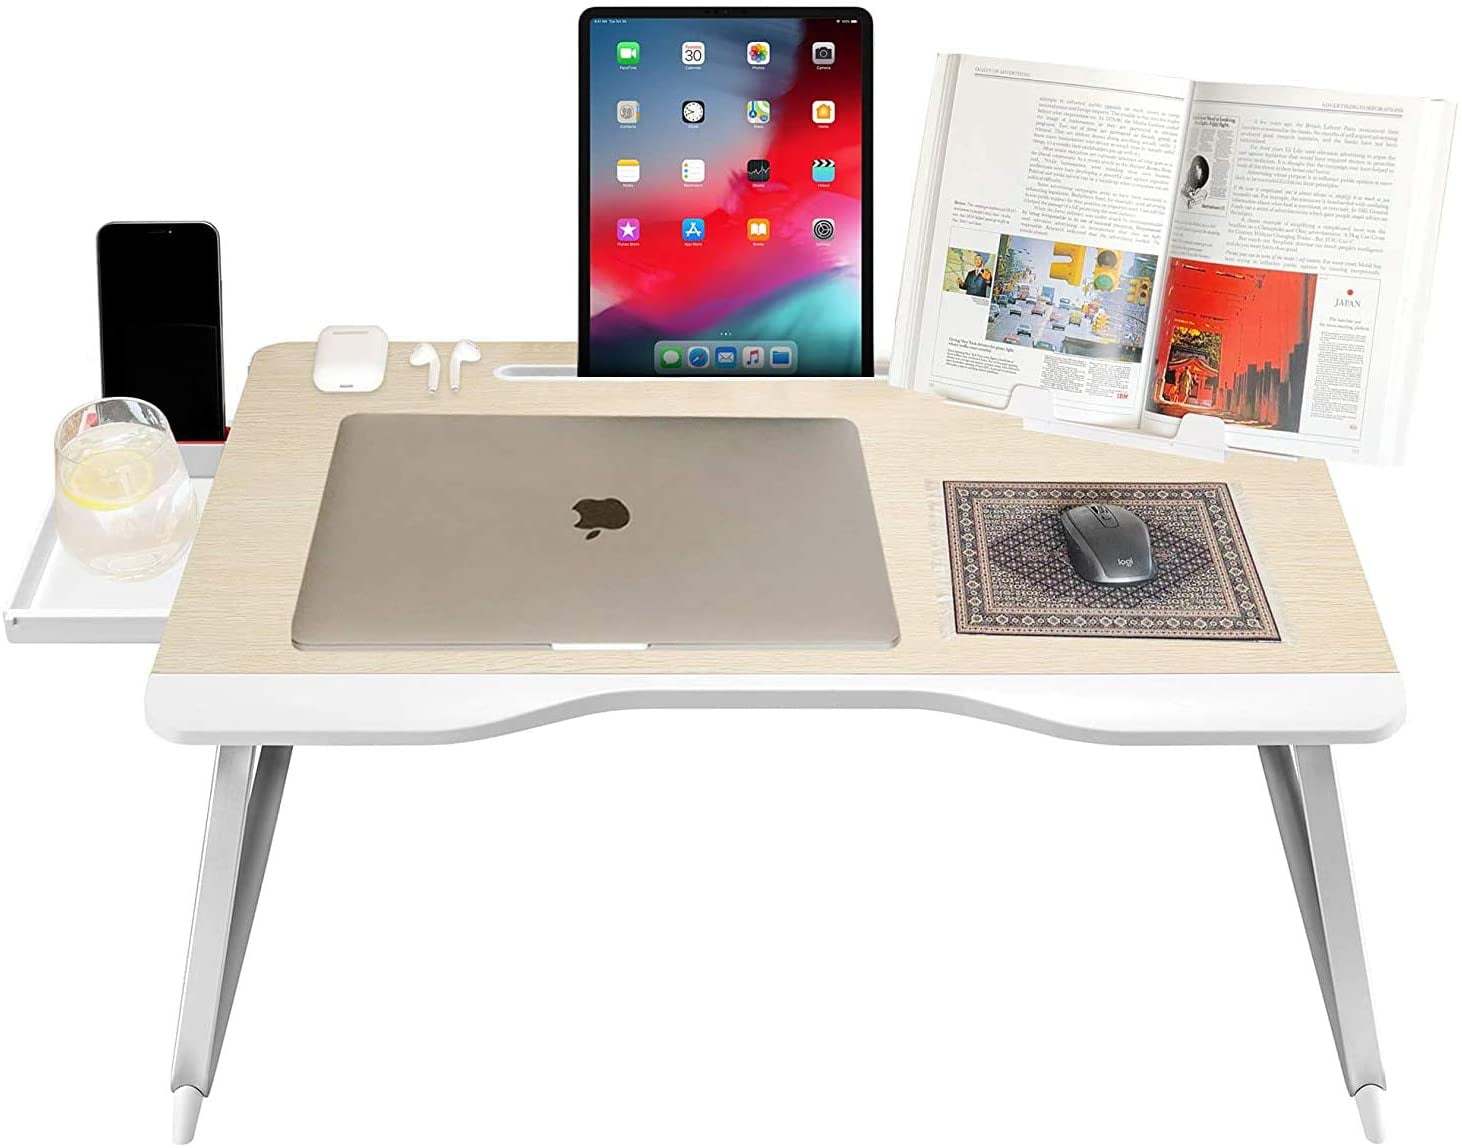 Portable Computer Bed Table,Folding Laptop Table for Bed and Sofa Multi-functional computer table for couch studying gaming eating. laptop bed tray for working writing bed laptop desk for lap 